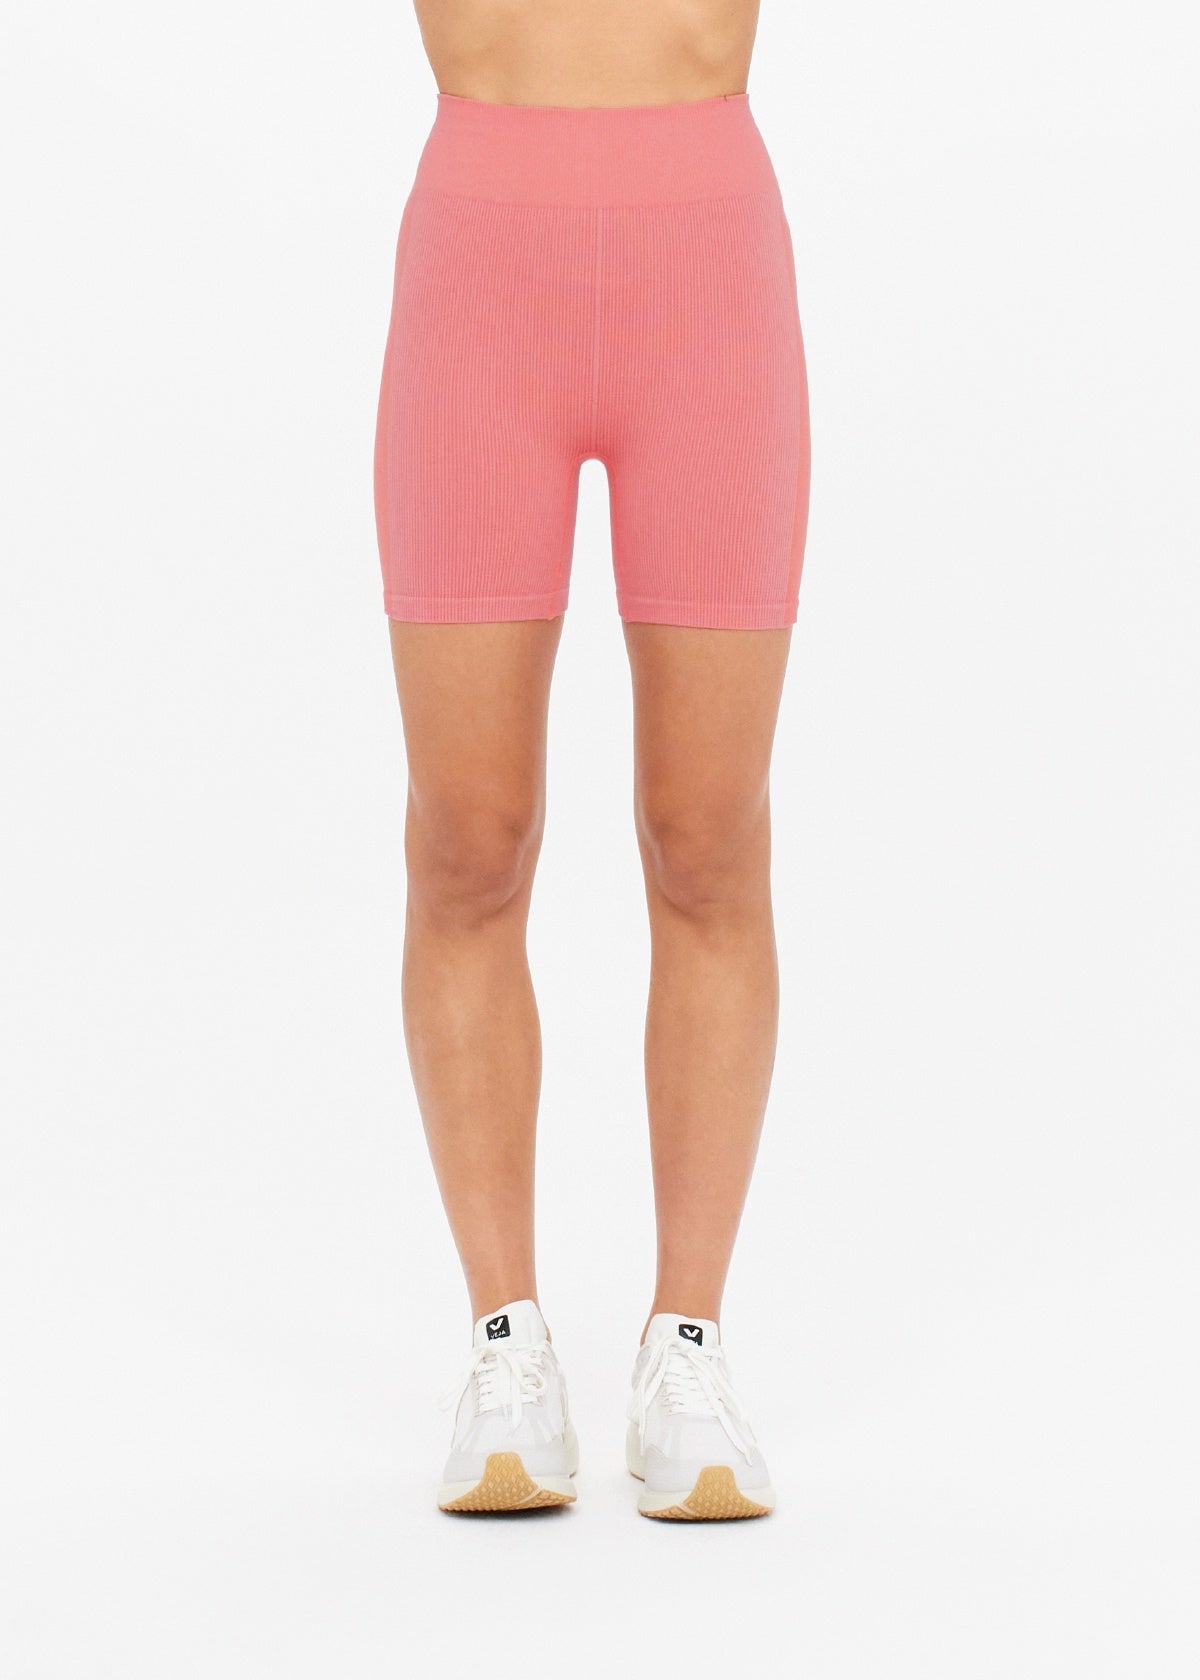 Soft Seamless spin short - Tights